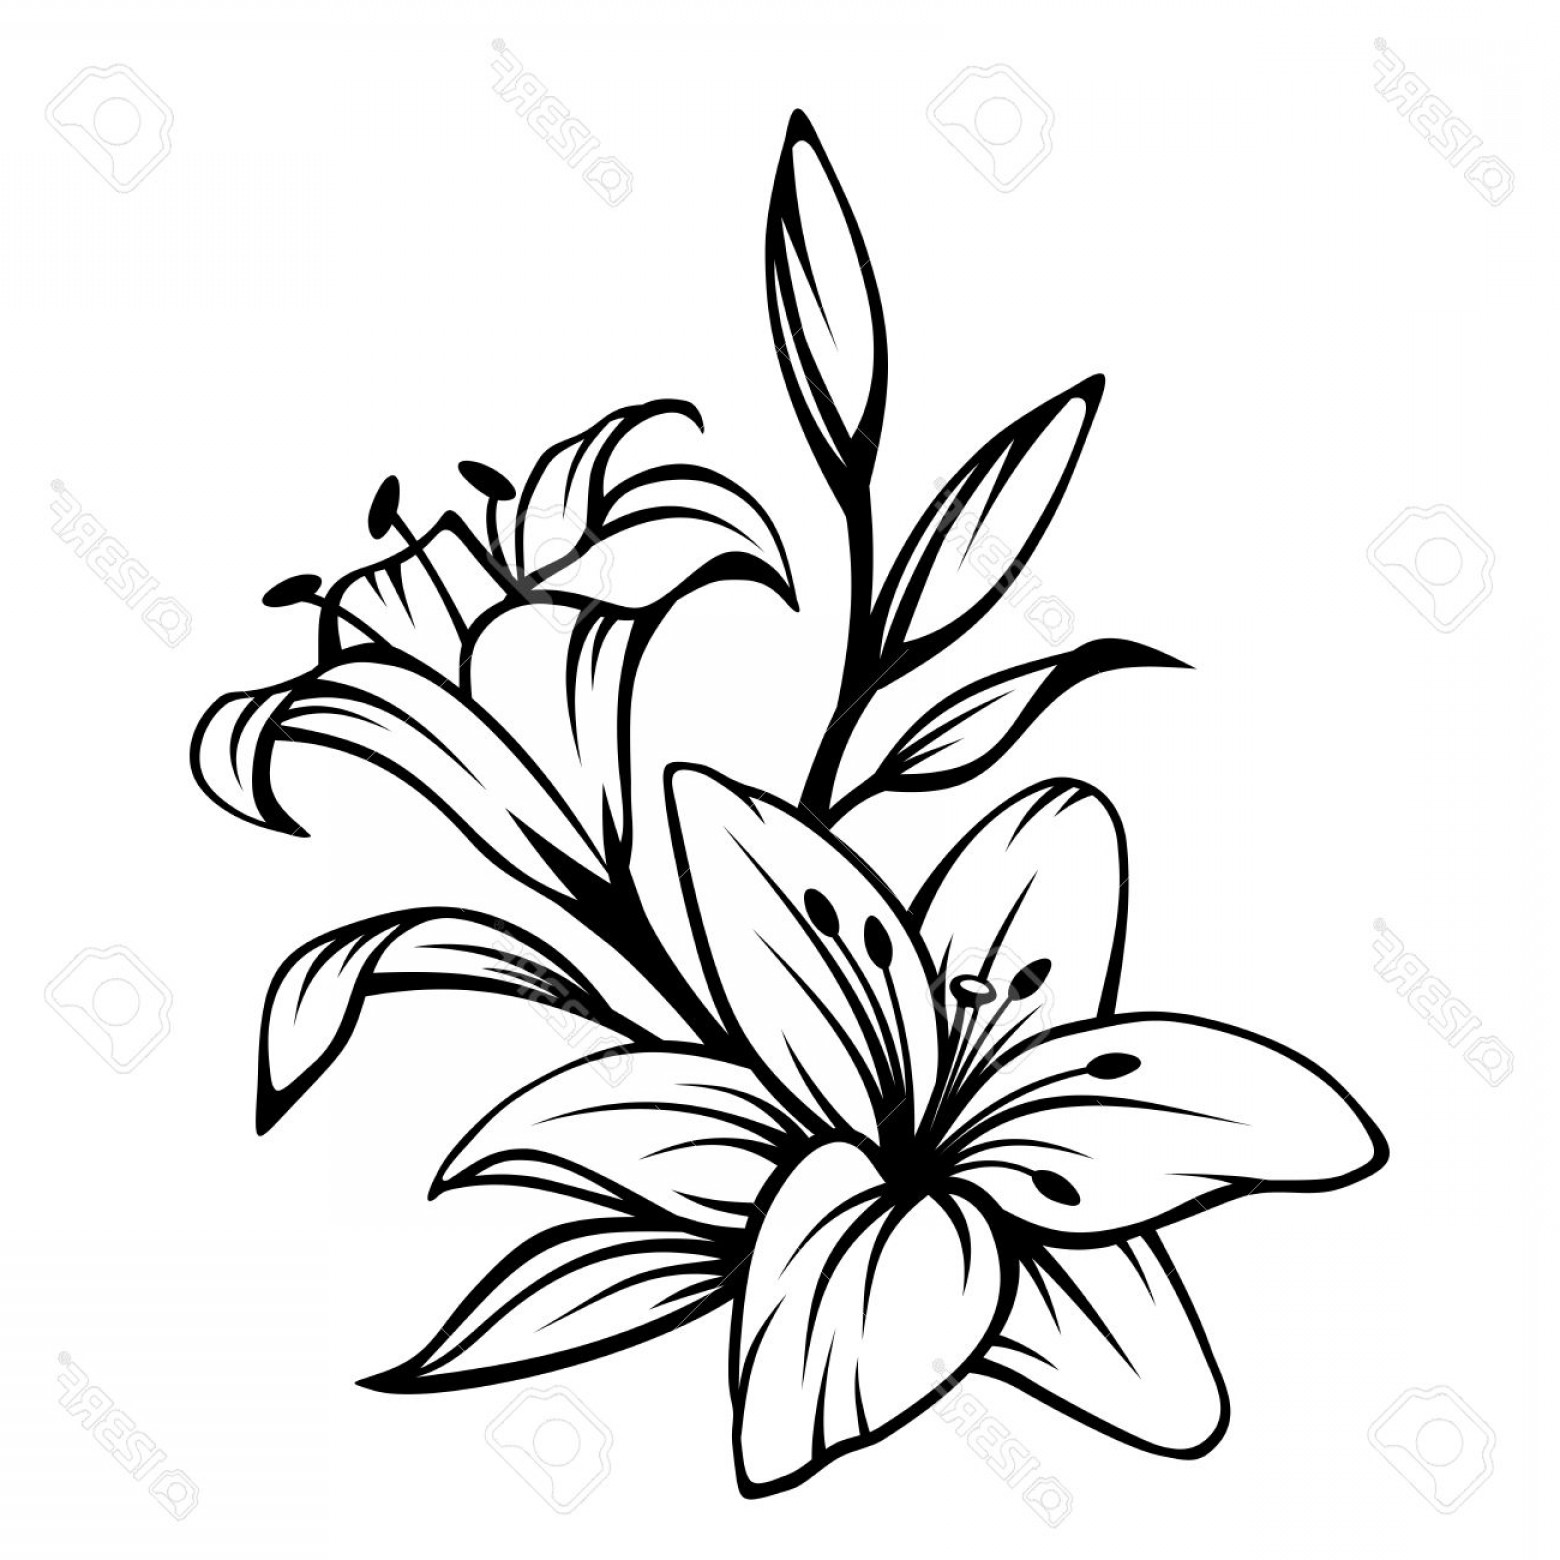 flower clipart black and white lily